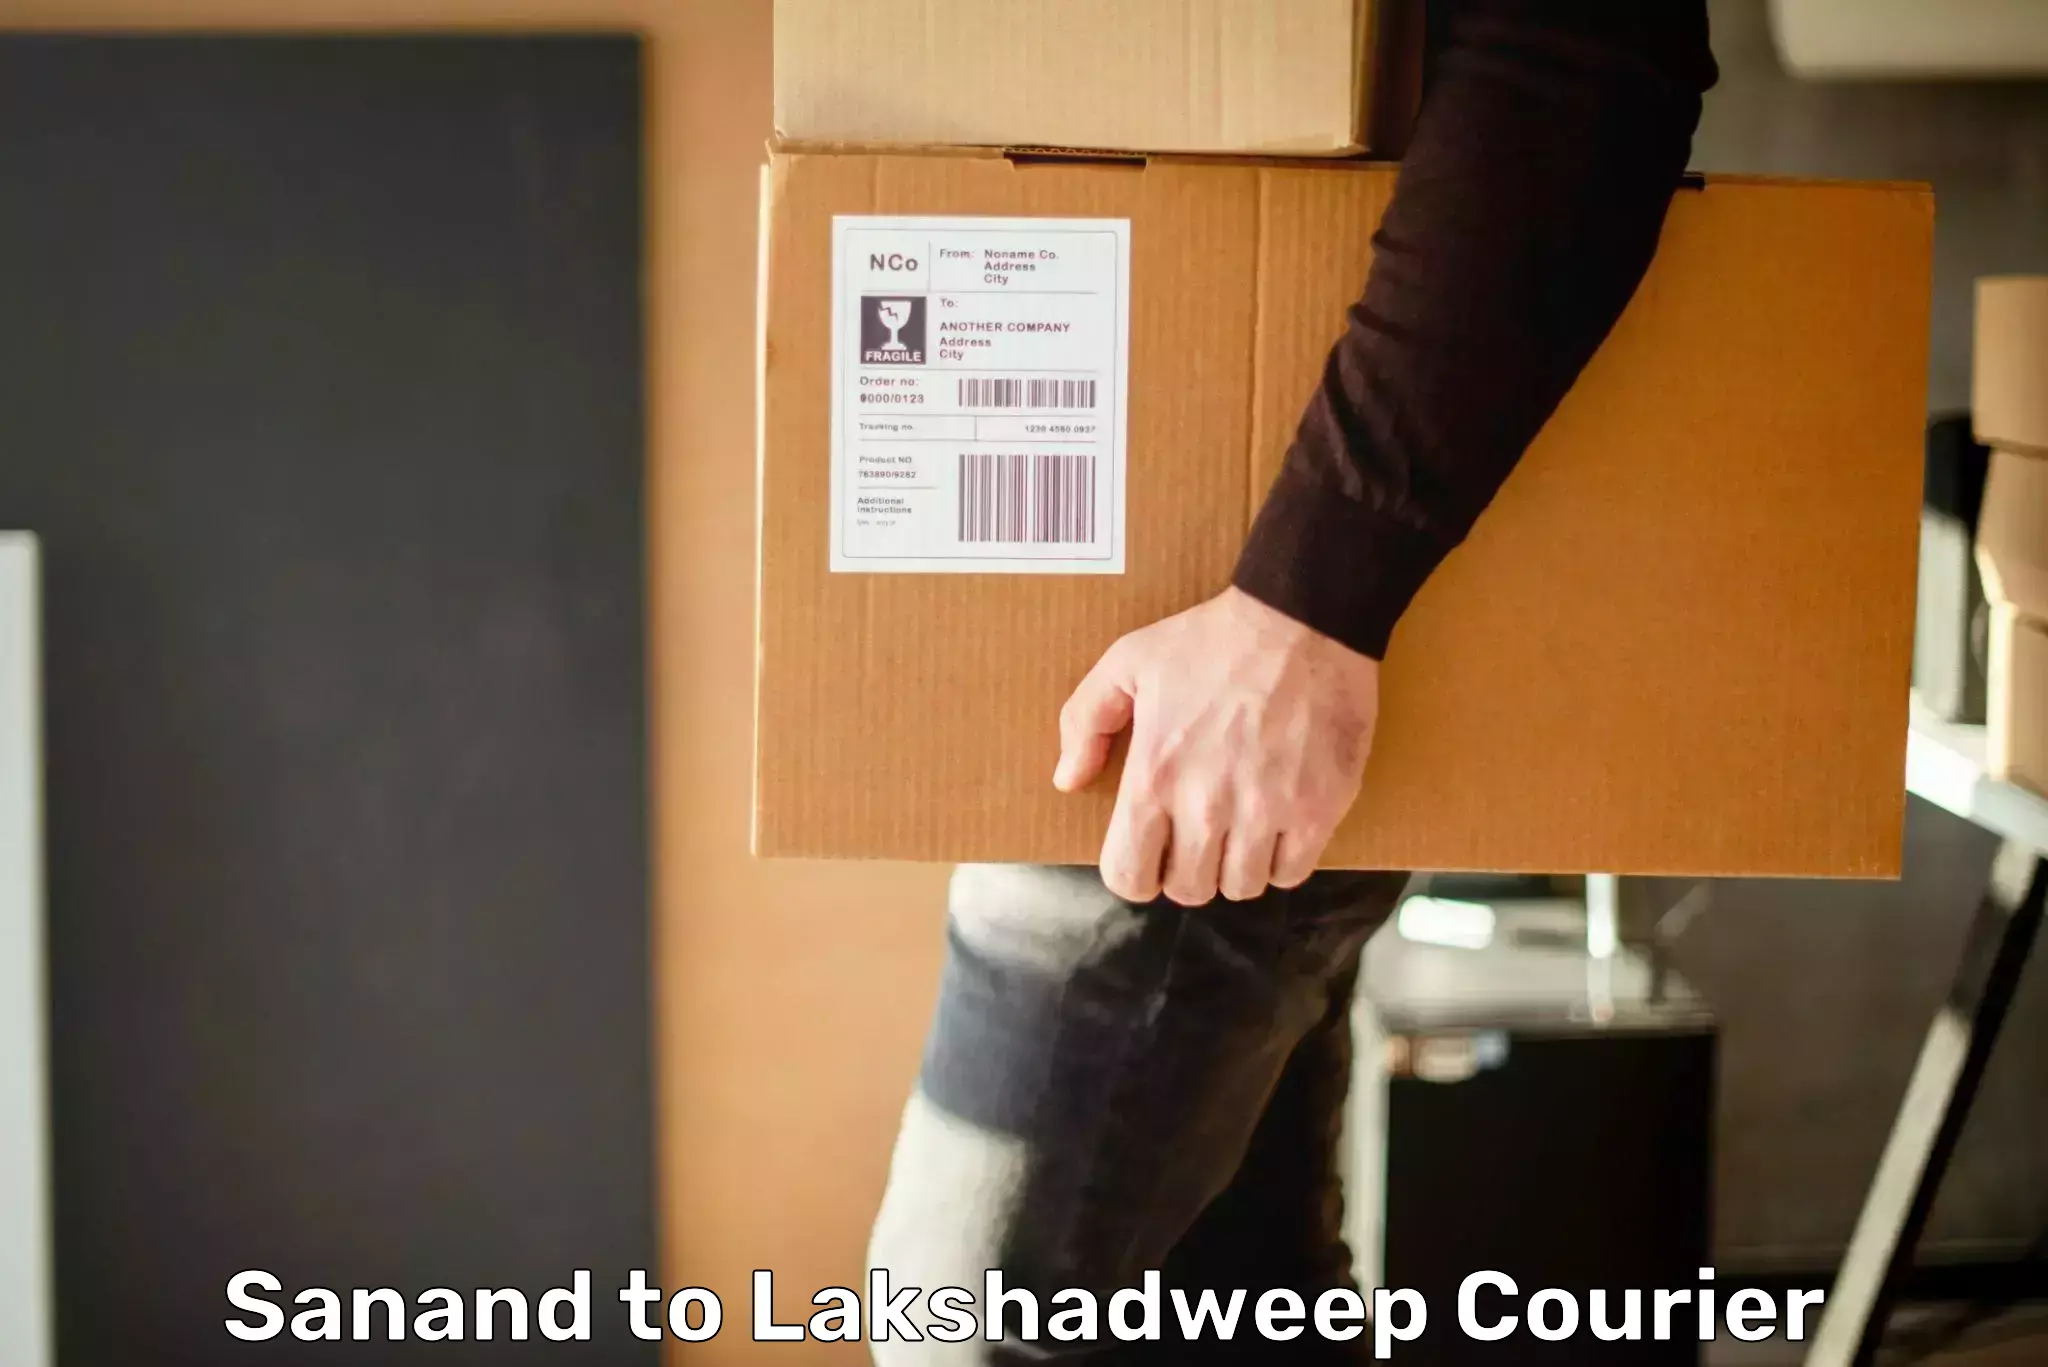 Domestic courier Sanand to Lakshadweep